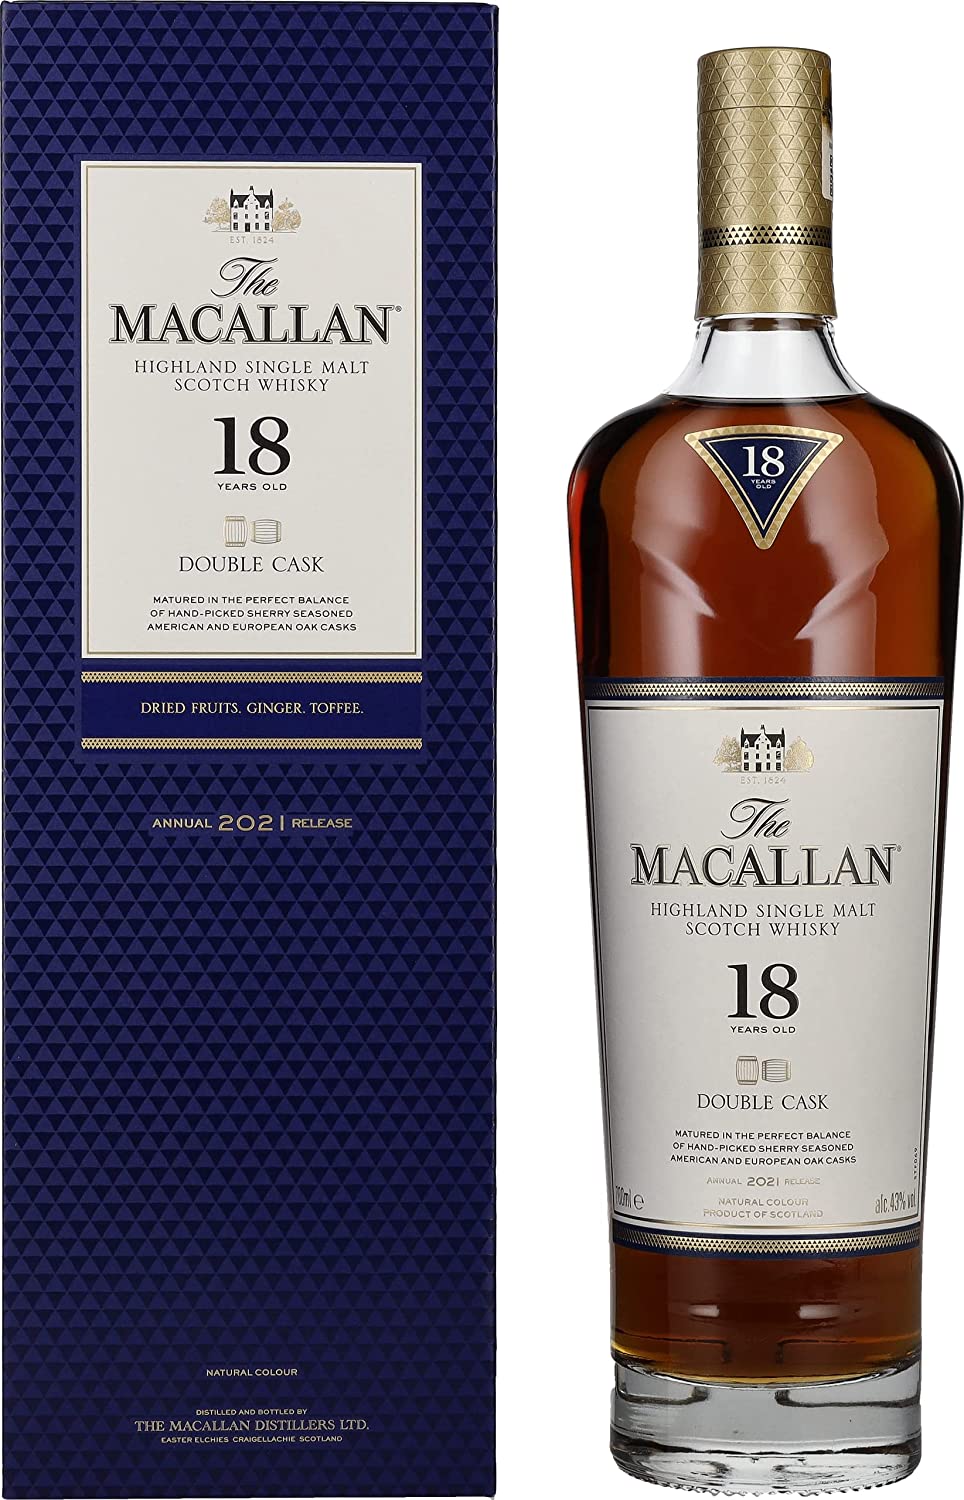 The Macallan 18 Years Old DOUBLE CASK 43% Vol